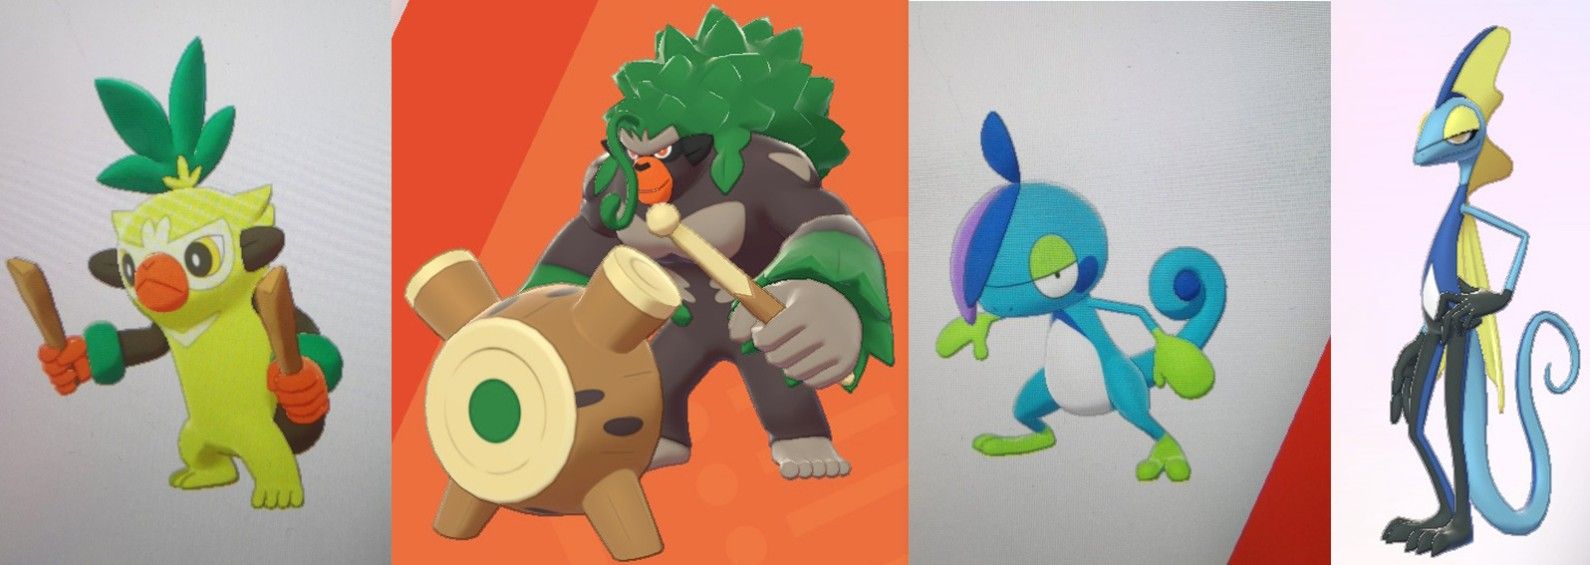 Pokemon Sword And Shield Grookey And Sobbles Final